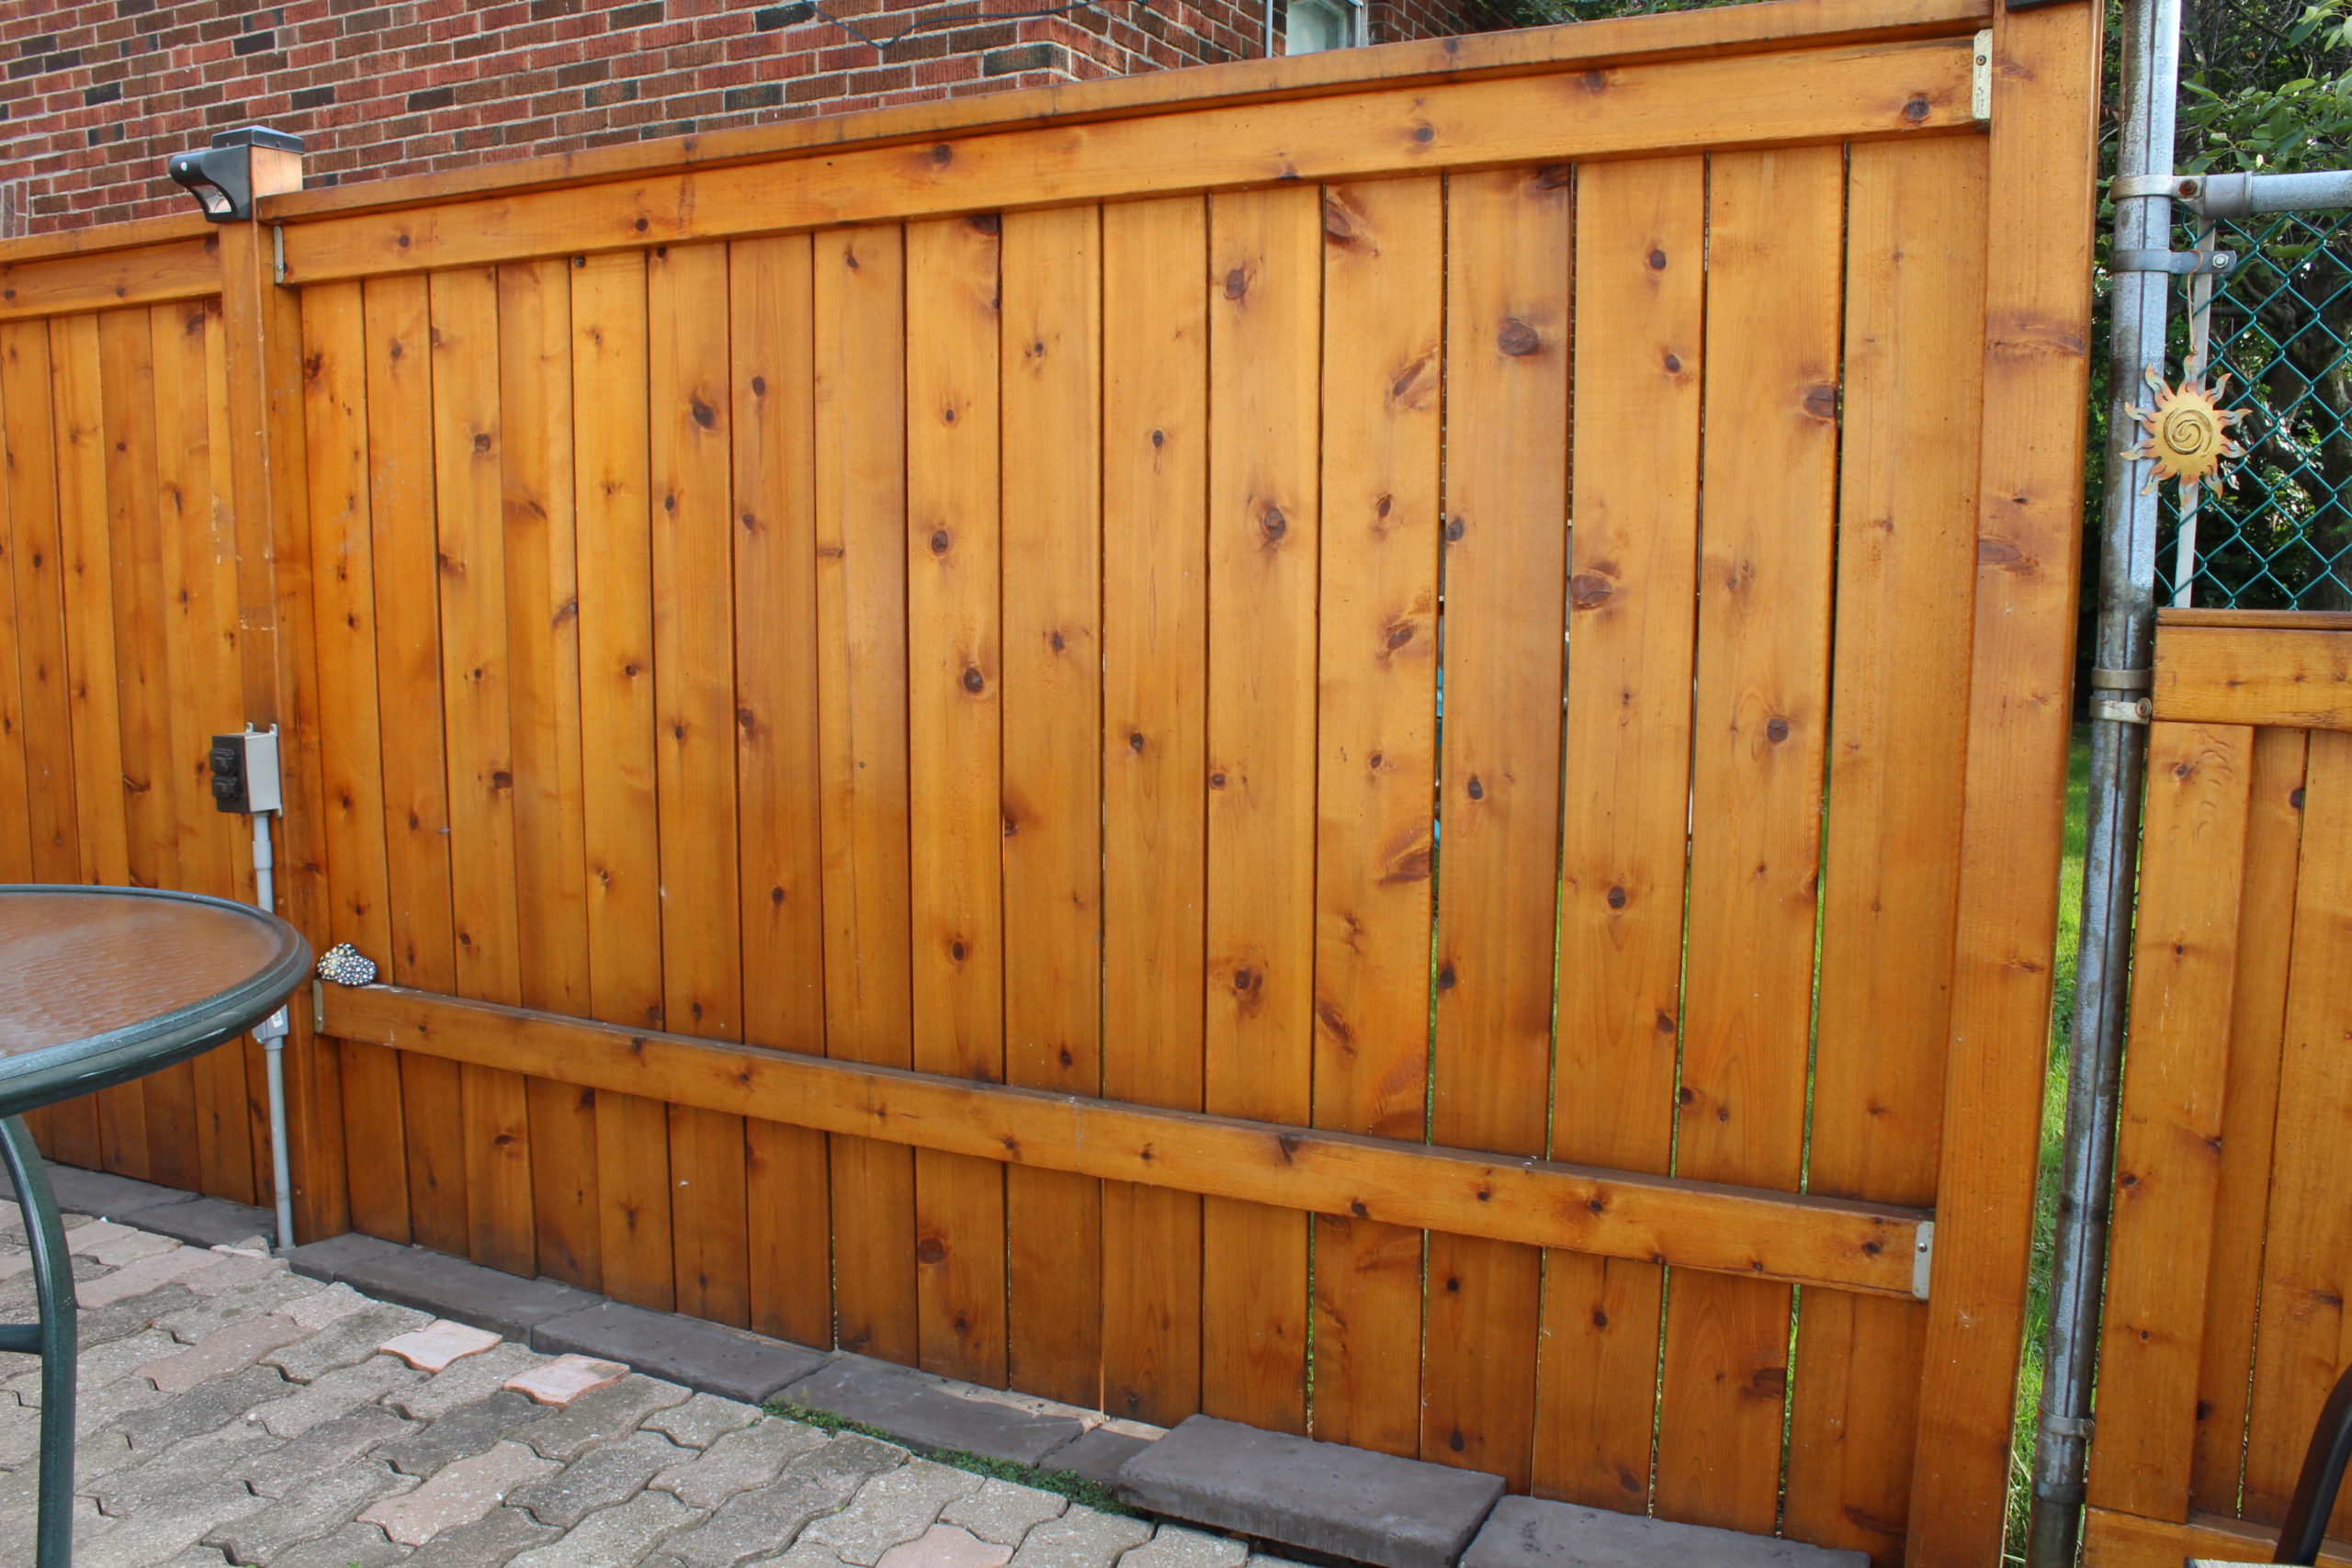 Privacy Fence - Wood Fence - Turkstra Lumber